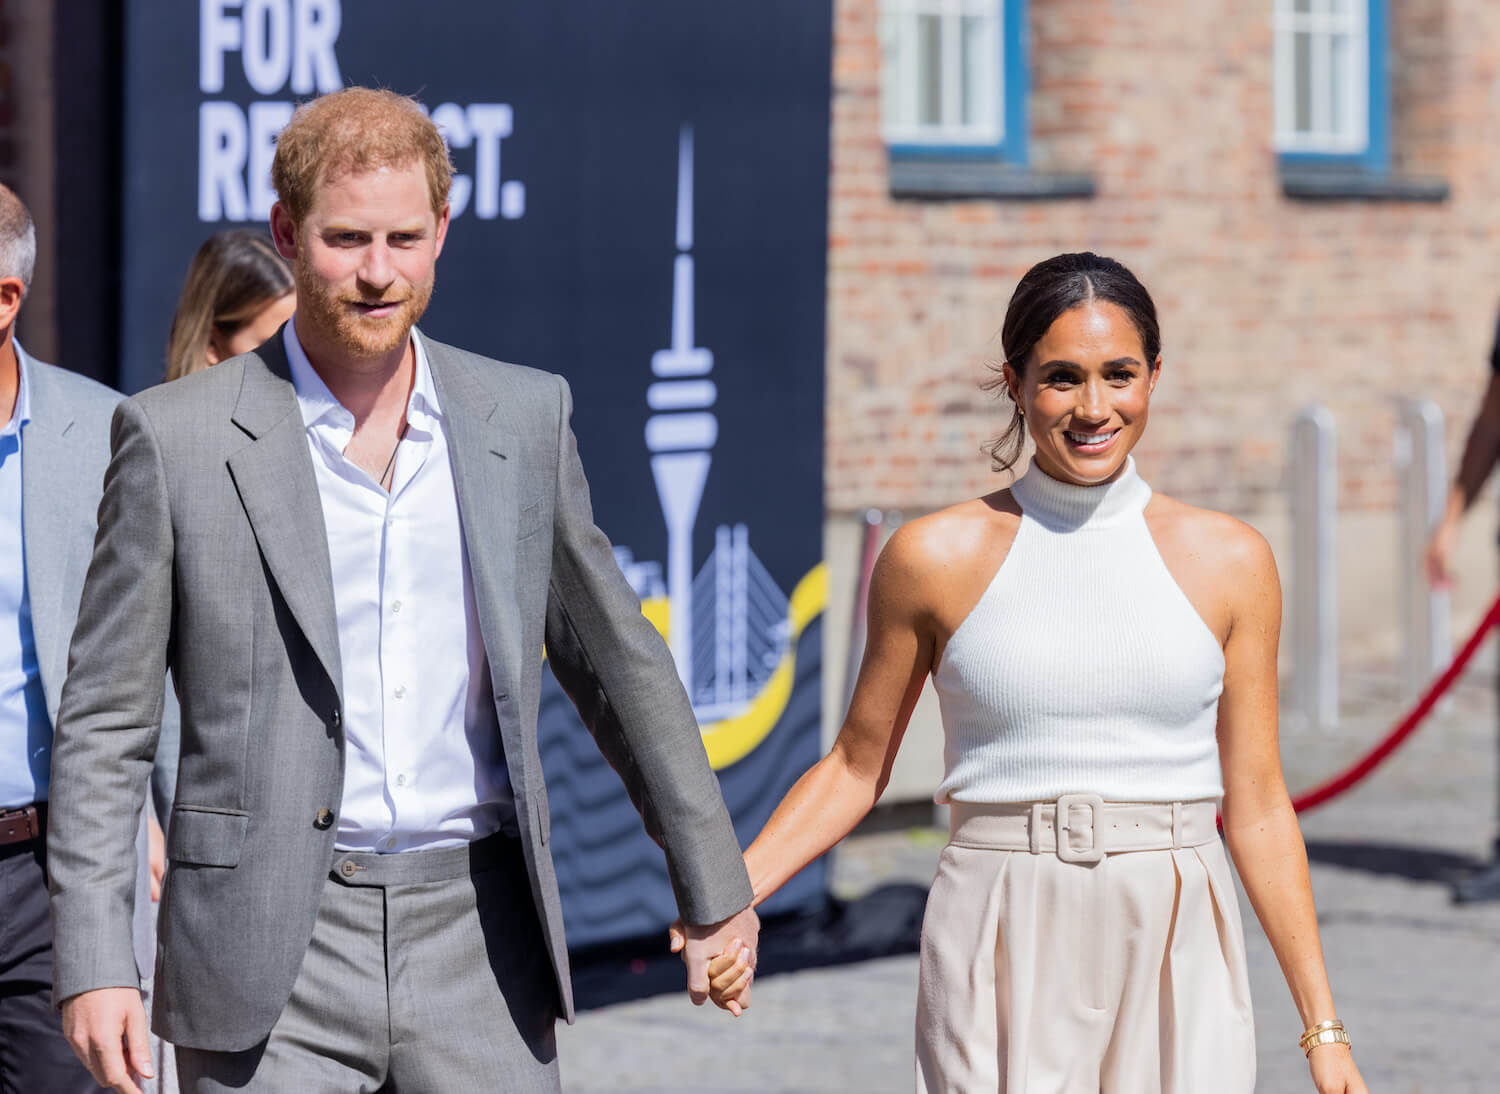 Prince Harry shared that the language barrier caused troubles with Meghan Markle when they were first dating.